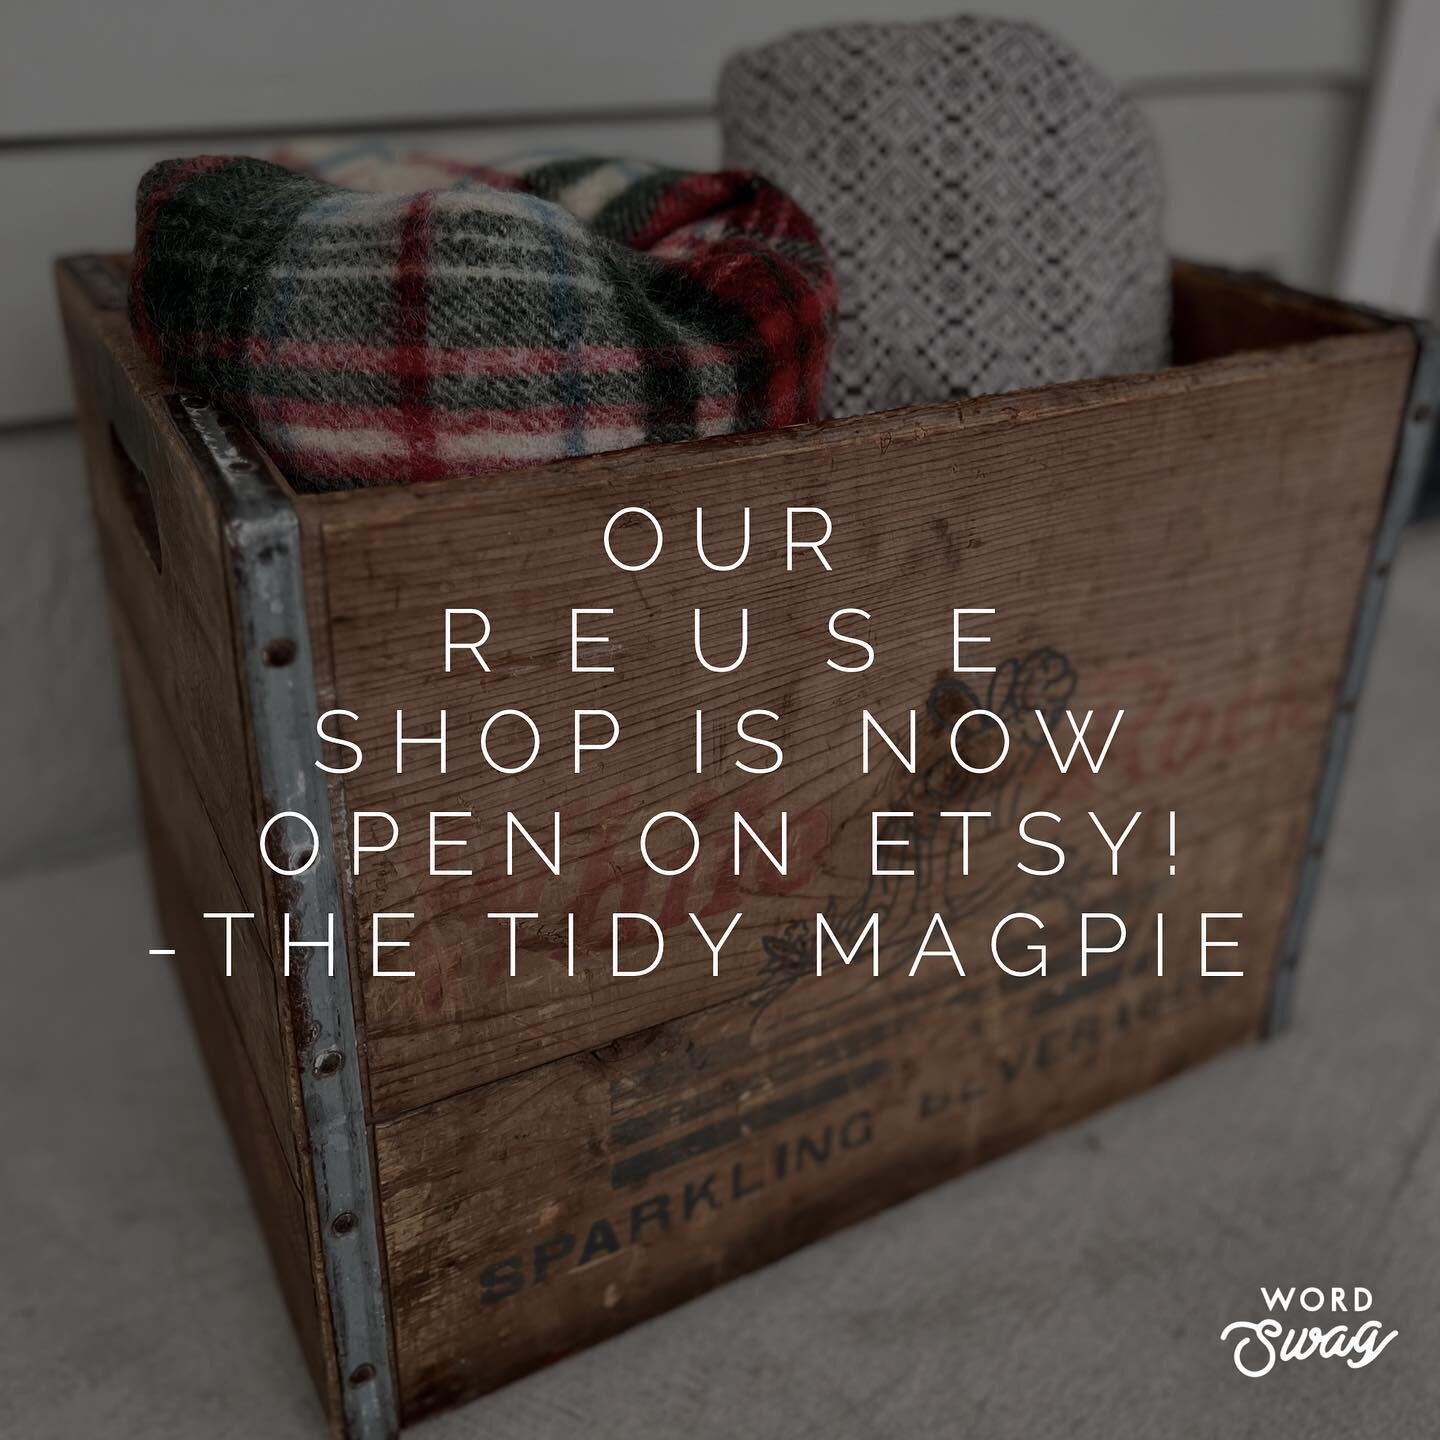 Excited to announce that The Tidy Magpie 🔁 R E U S E shop is now open!  Shop on ➡️ Etsy and soon on our website. Vintage housewares &amp; decor items are on Etsy. Refurbished organizing tools (baskets, bins, organizers) are available through your or